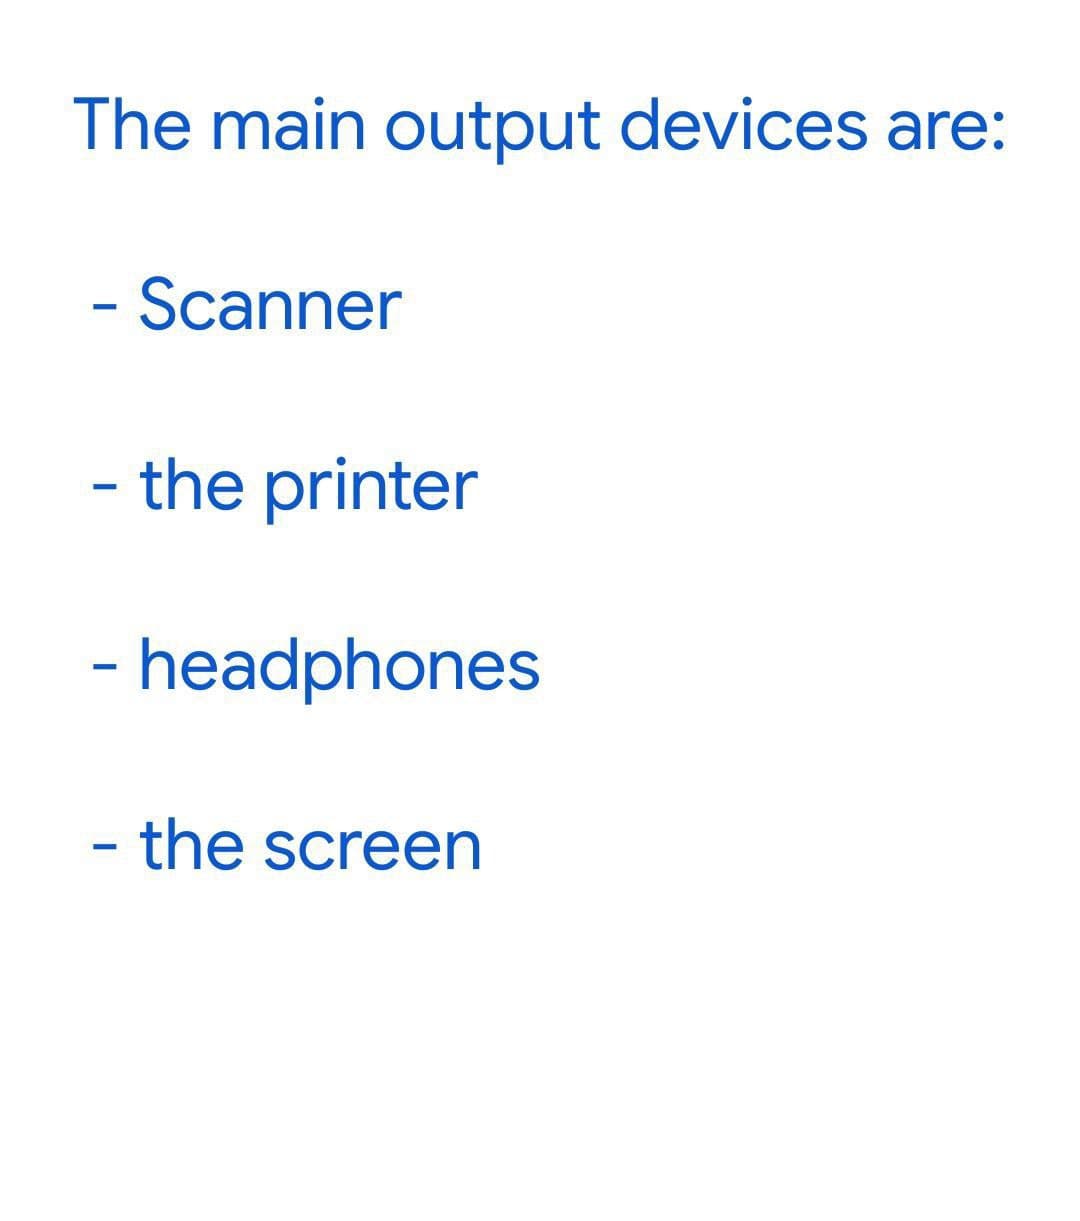 The main output devices are:
- Scanner
- the printer
-
headphones
- the screen